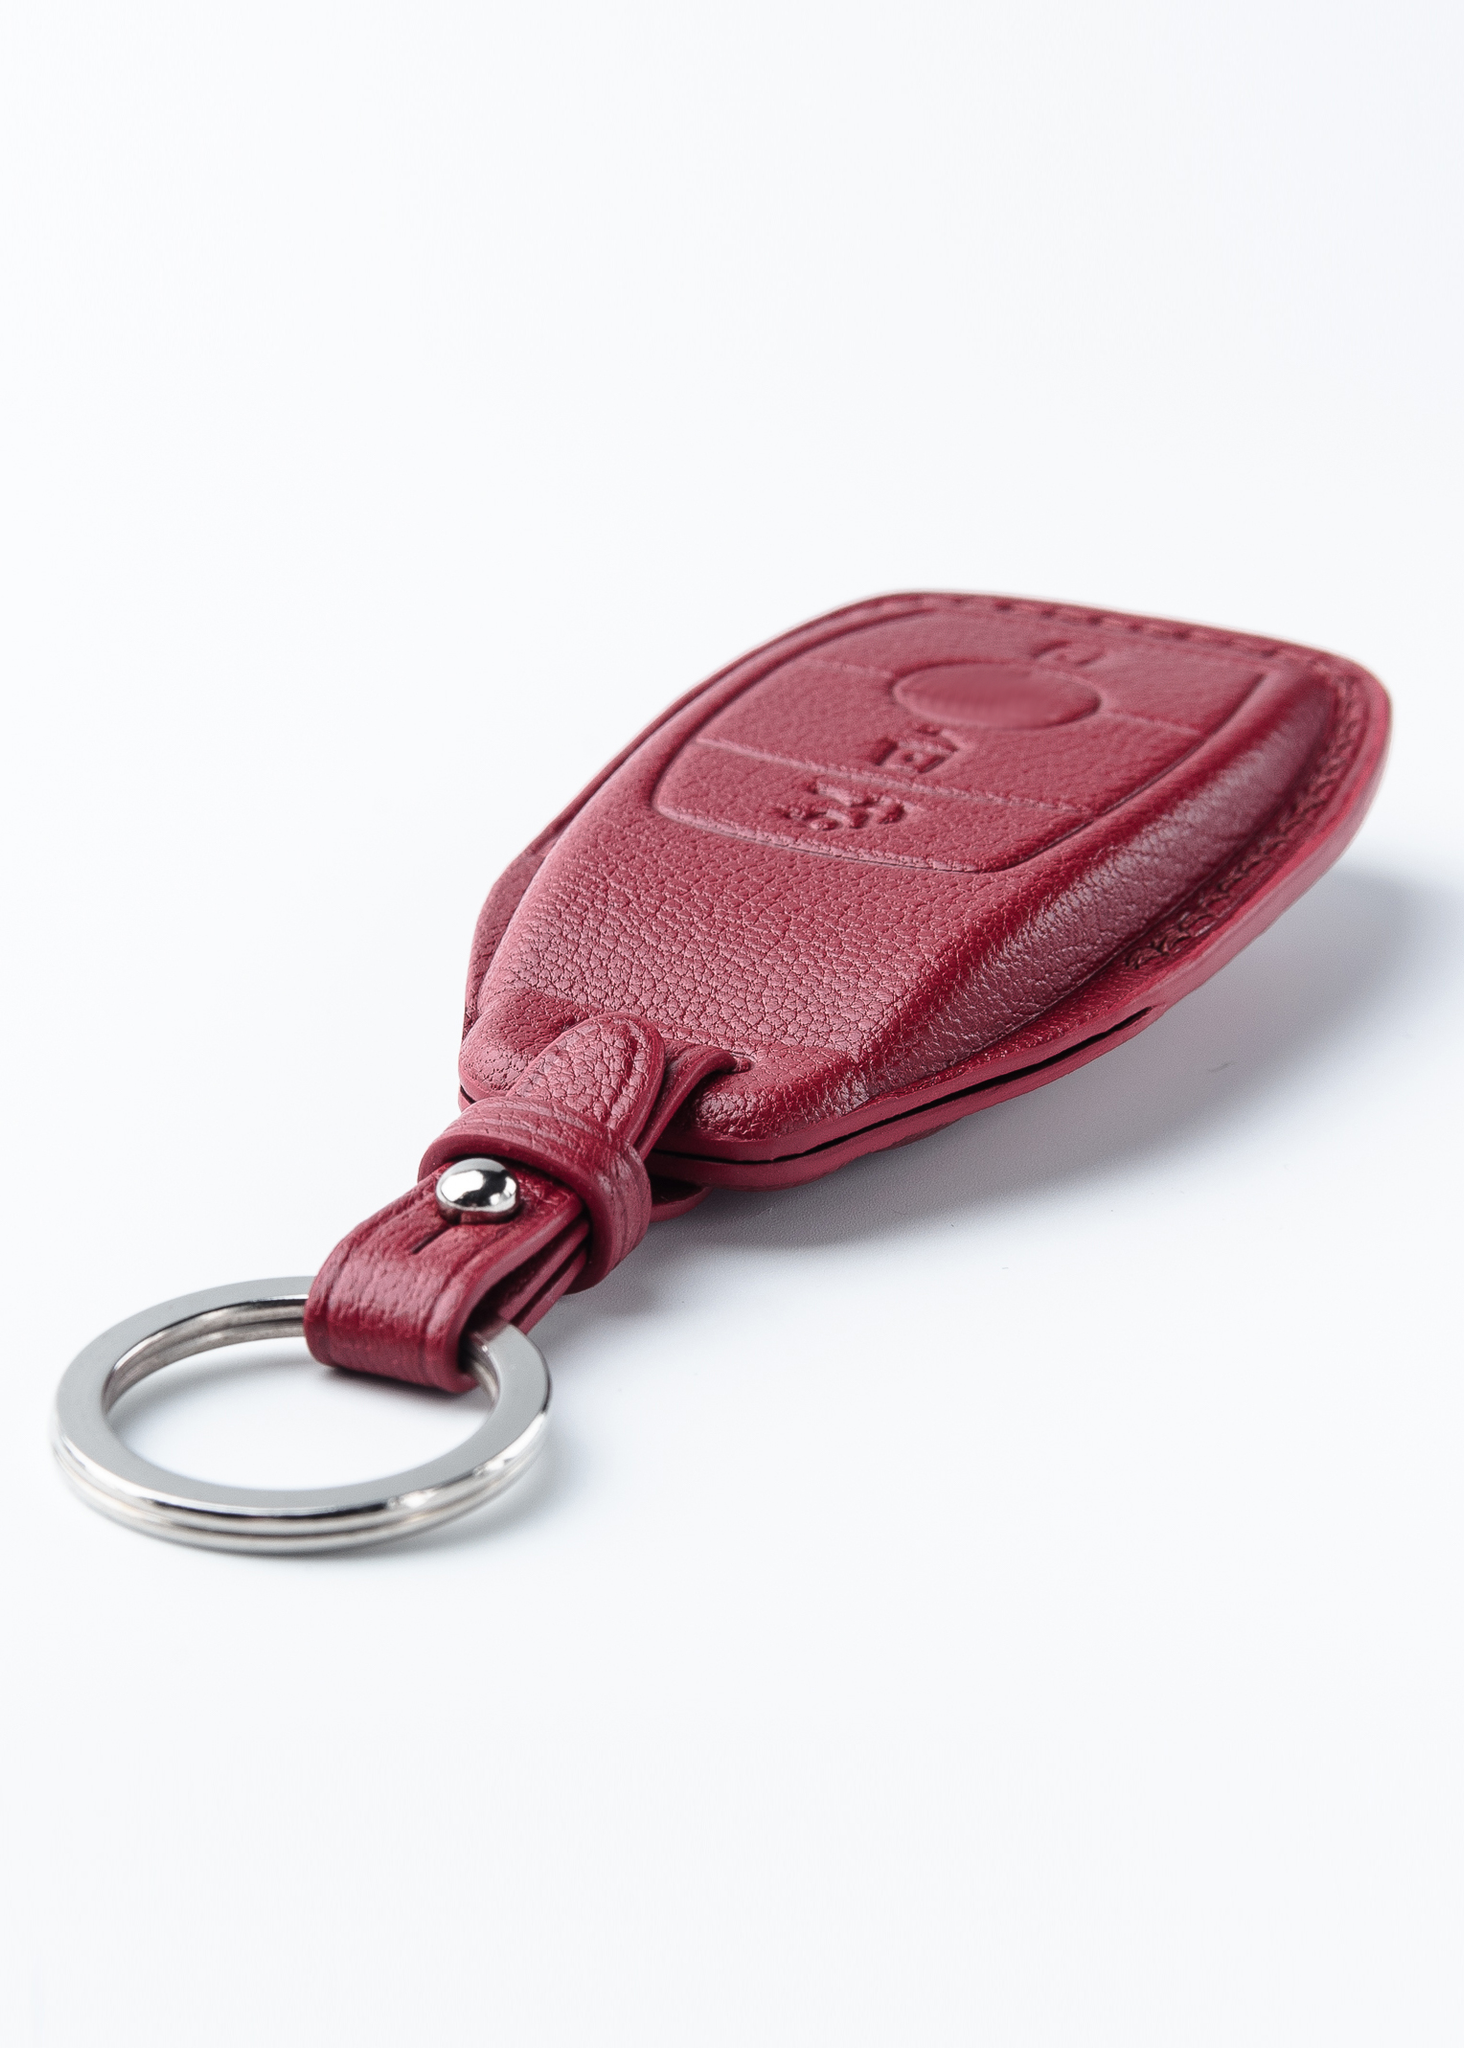 Pu Leather Car Key Case Cover Fob Protector For Mercedes Benz